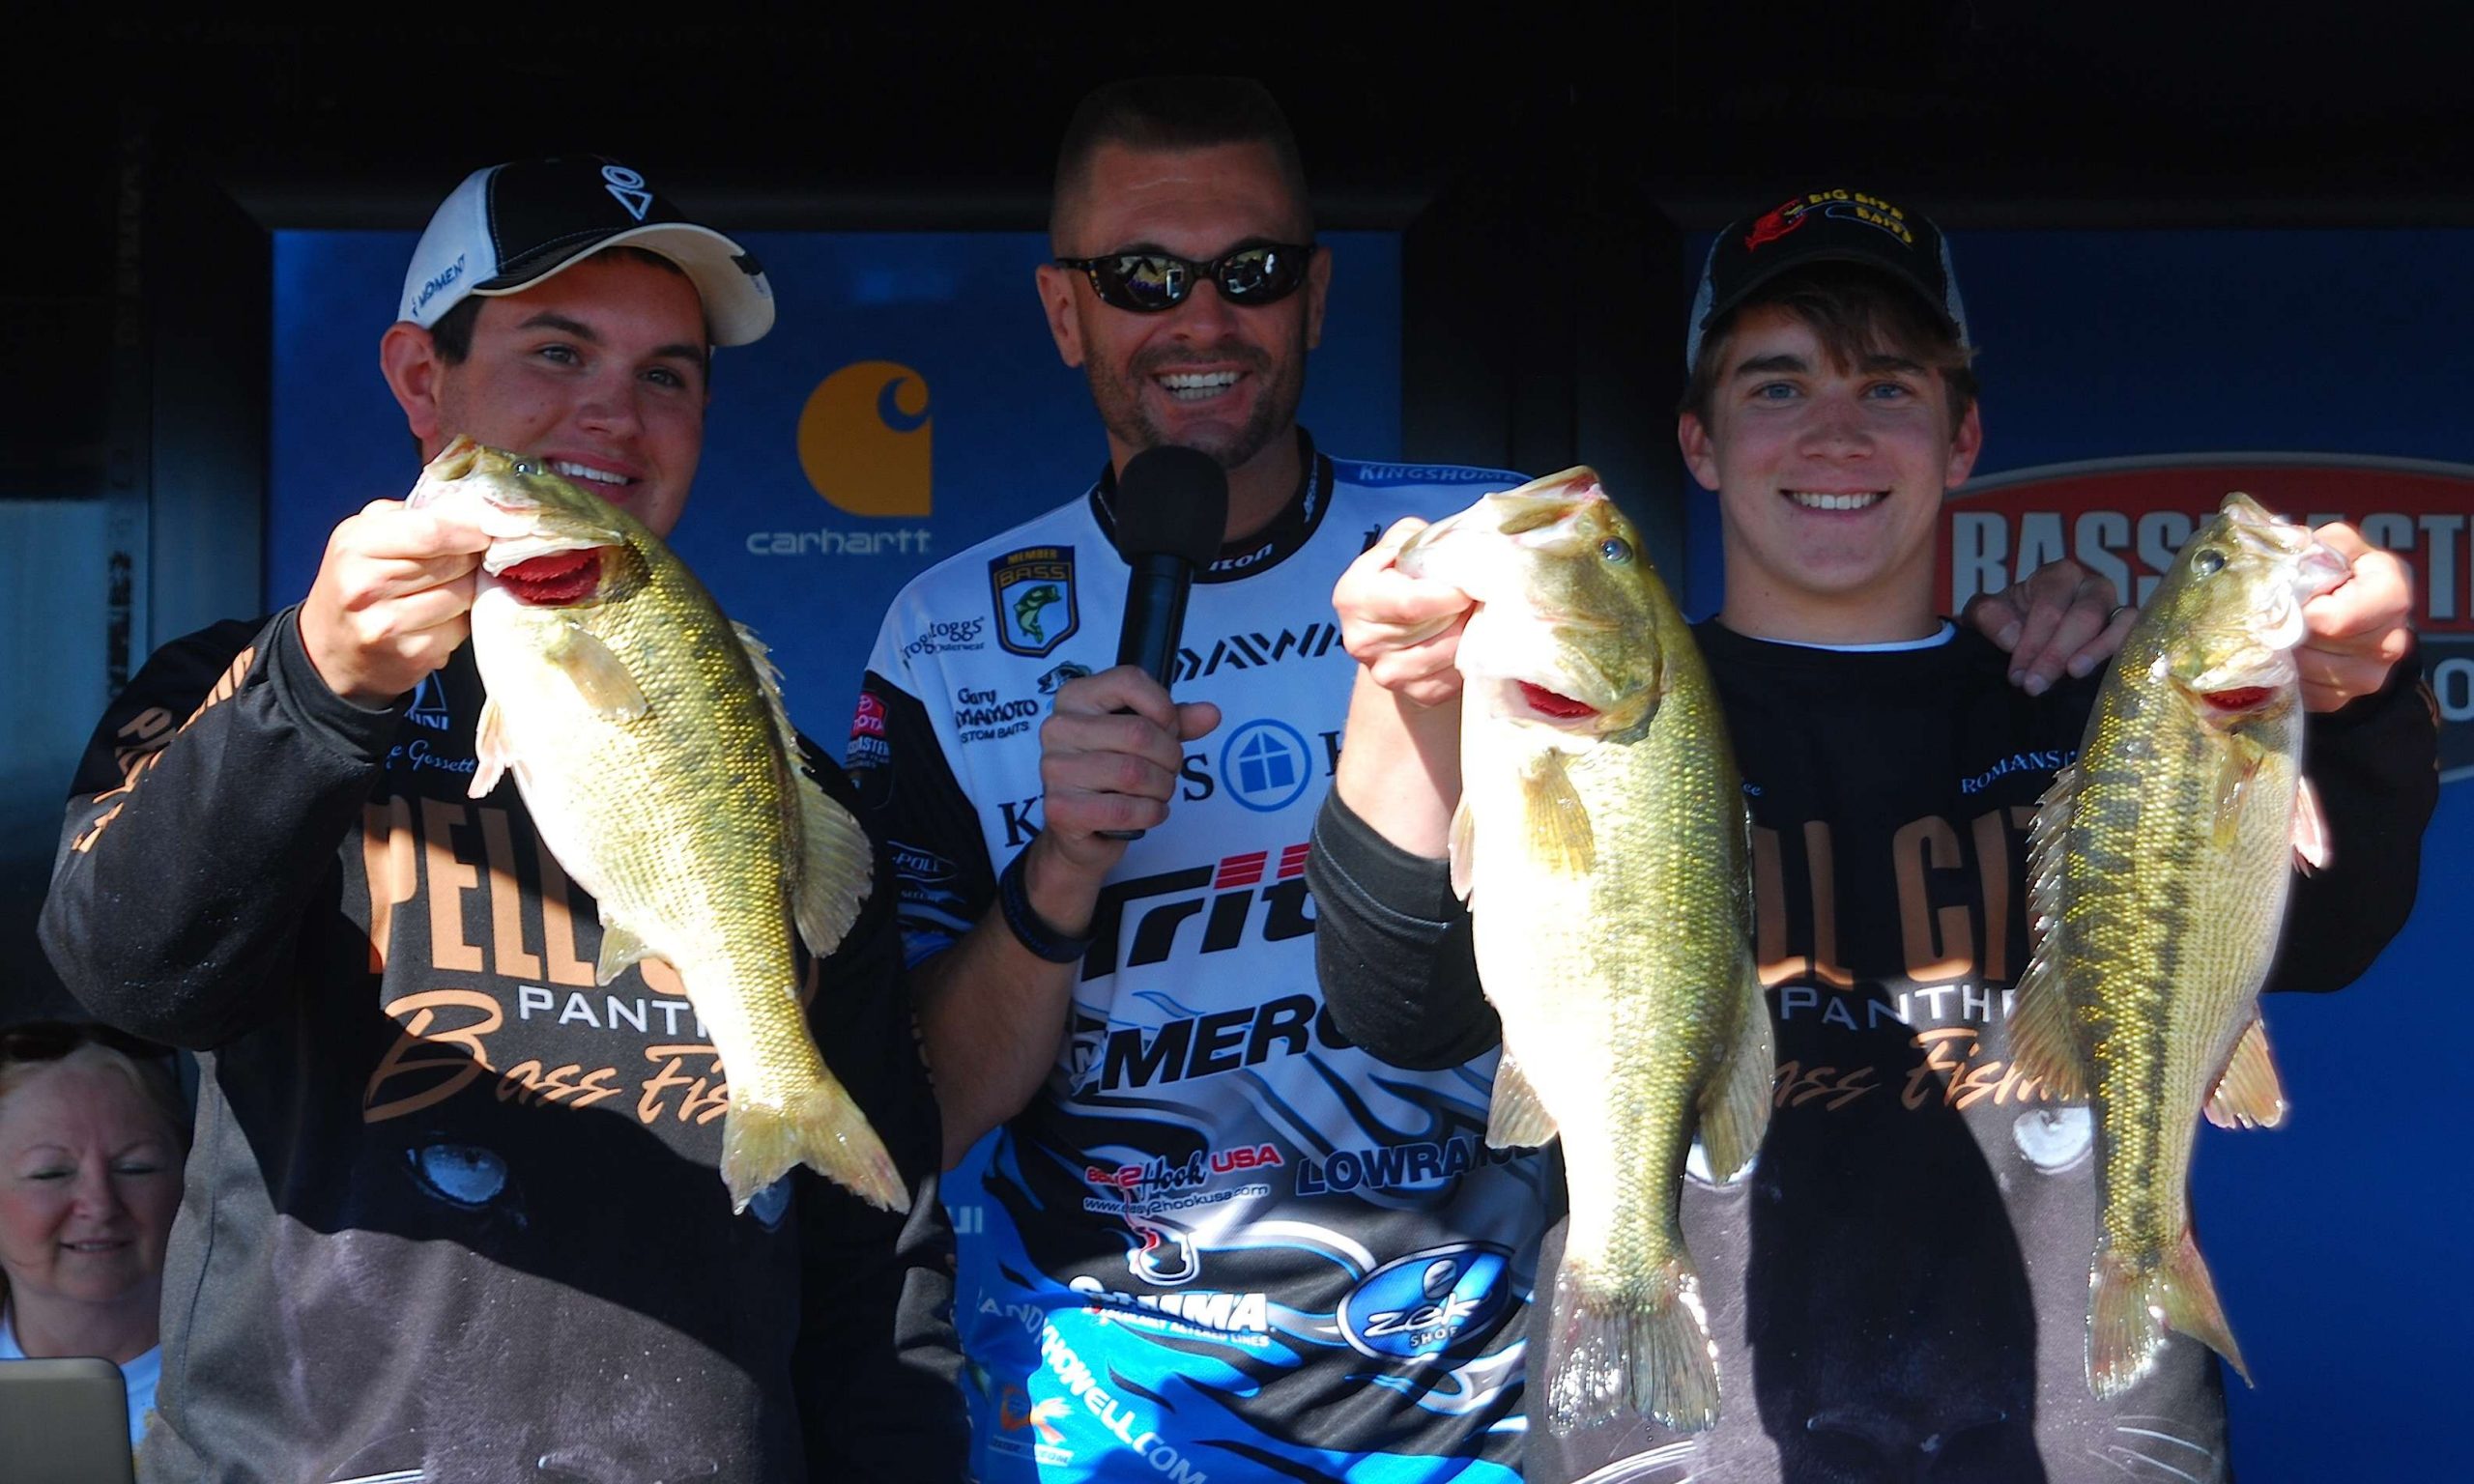 Hayden Bartee and Zeke Gossett show off 15.29 pounds of Championship bass. The Pell City High School team is your 2013 Alabama B.A.S.S. Nation High School Champions. 